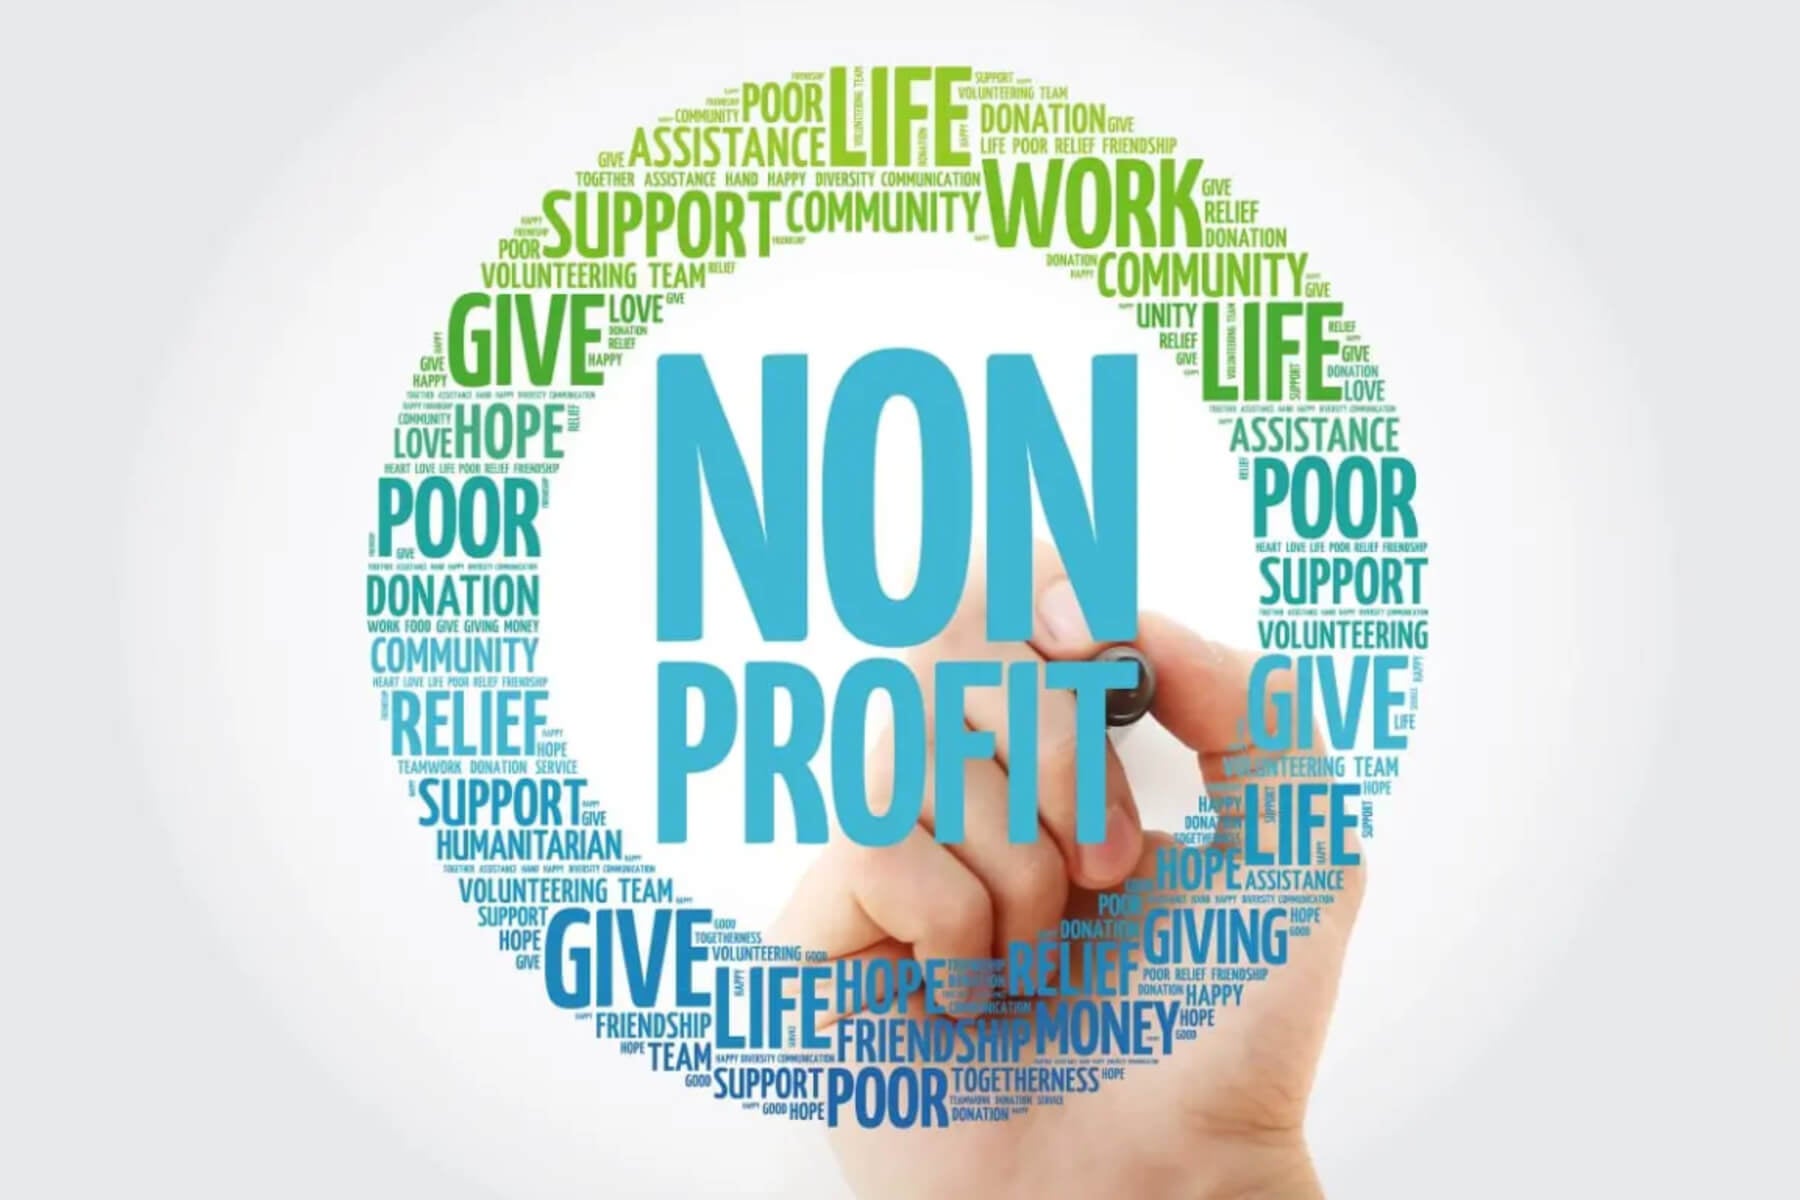 what is a nonprofit organization